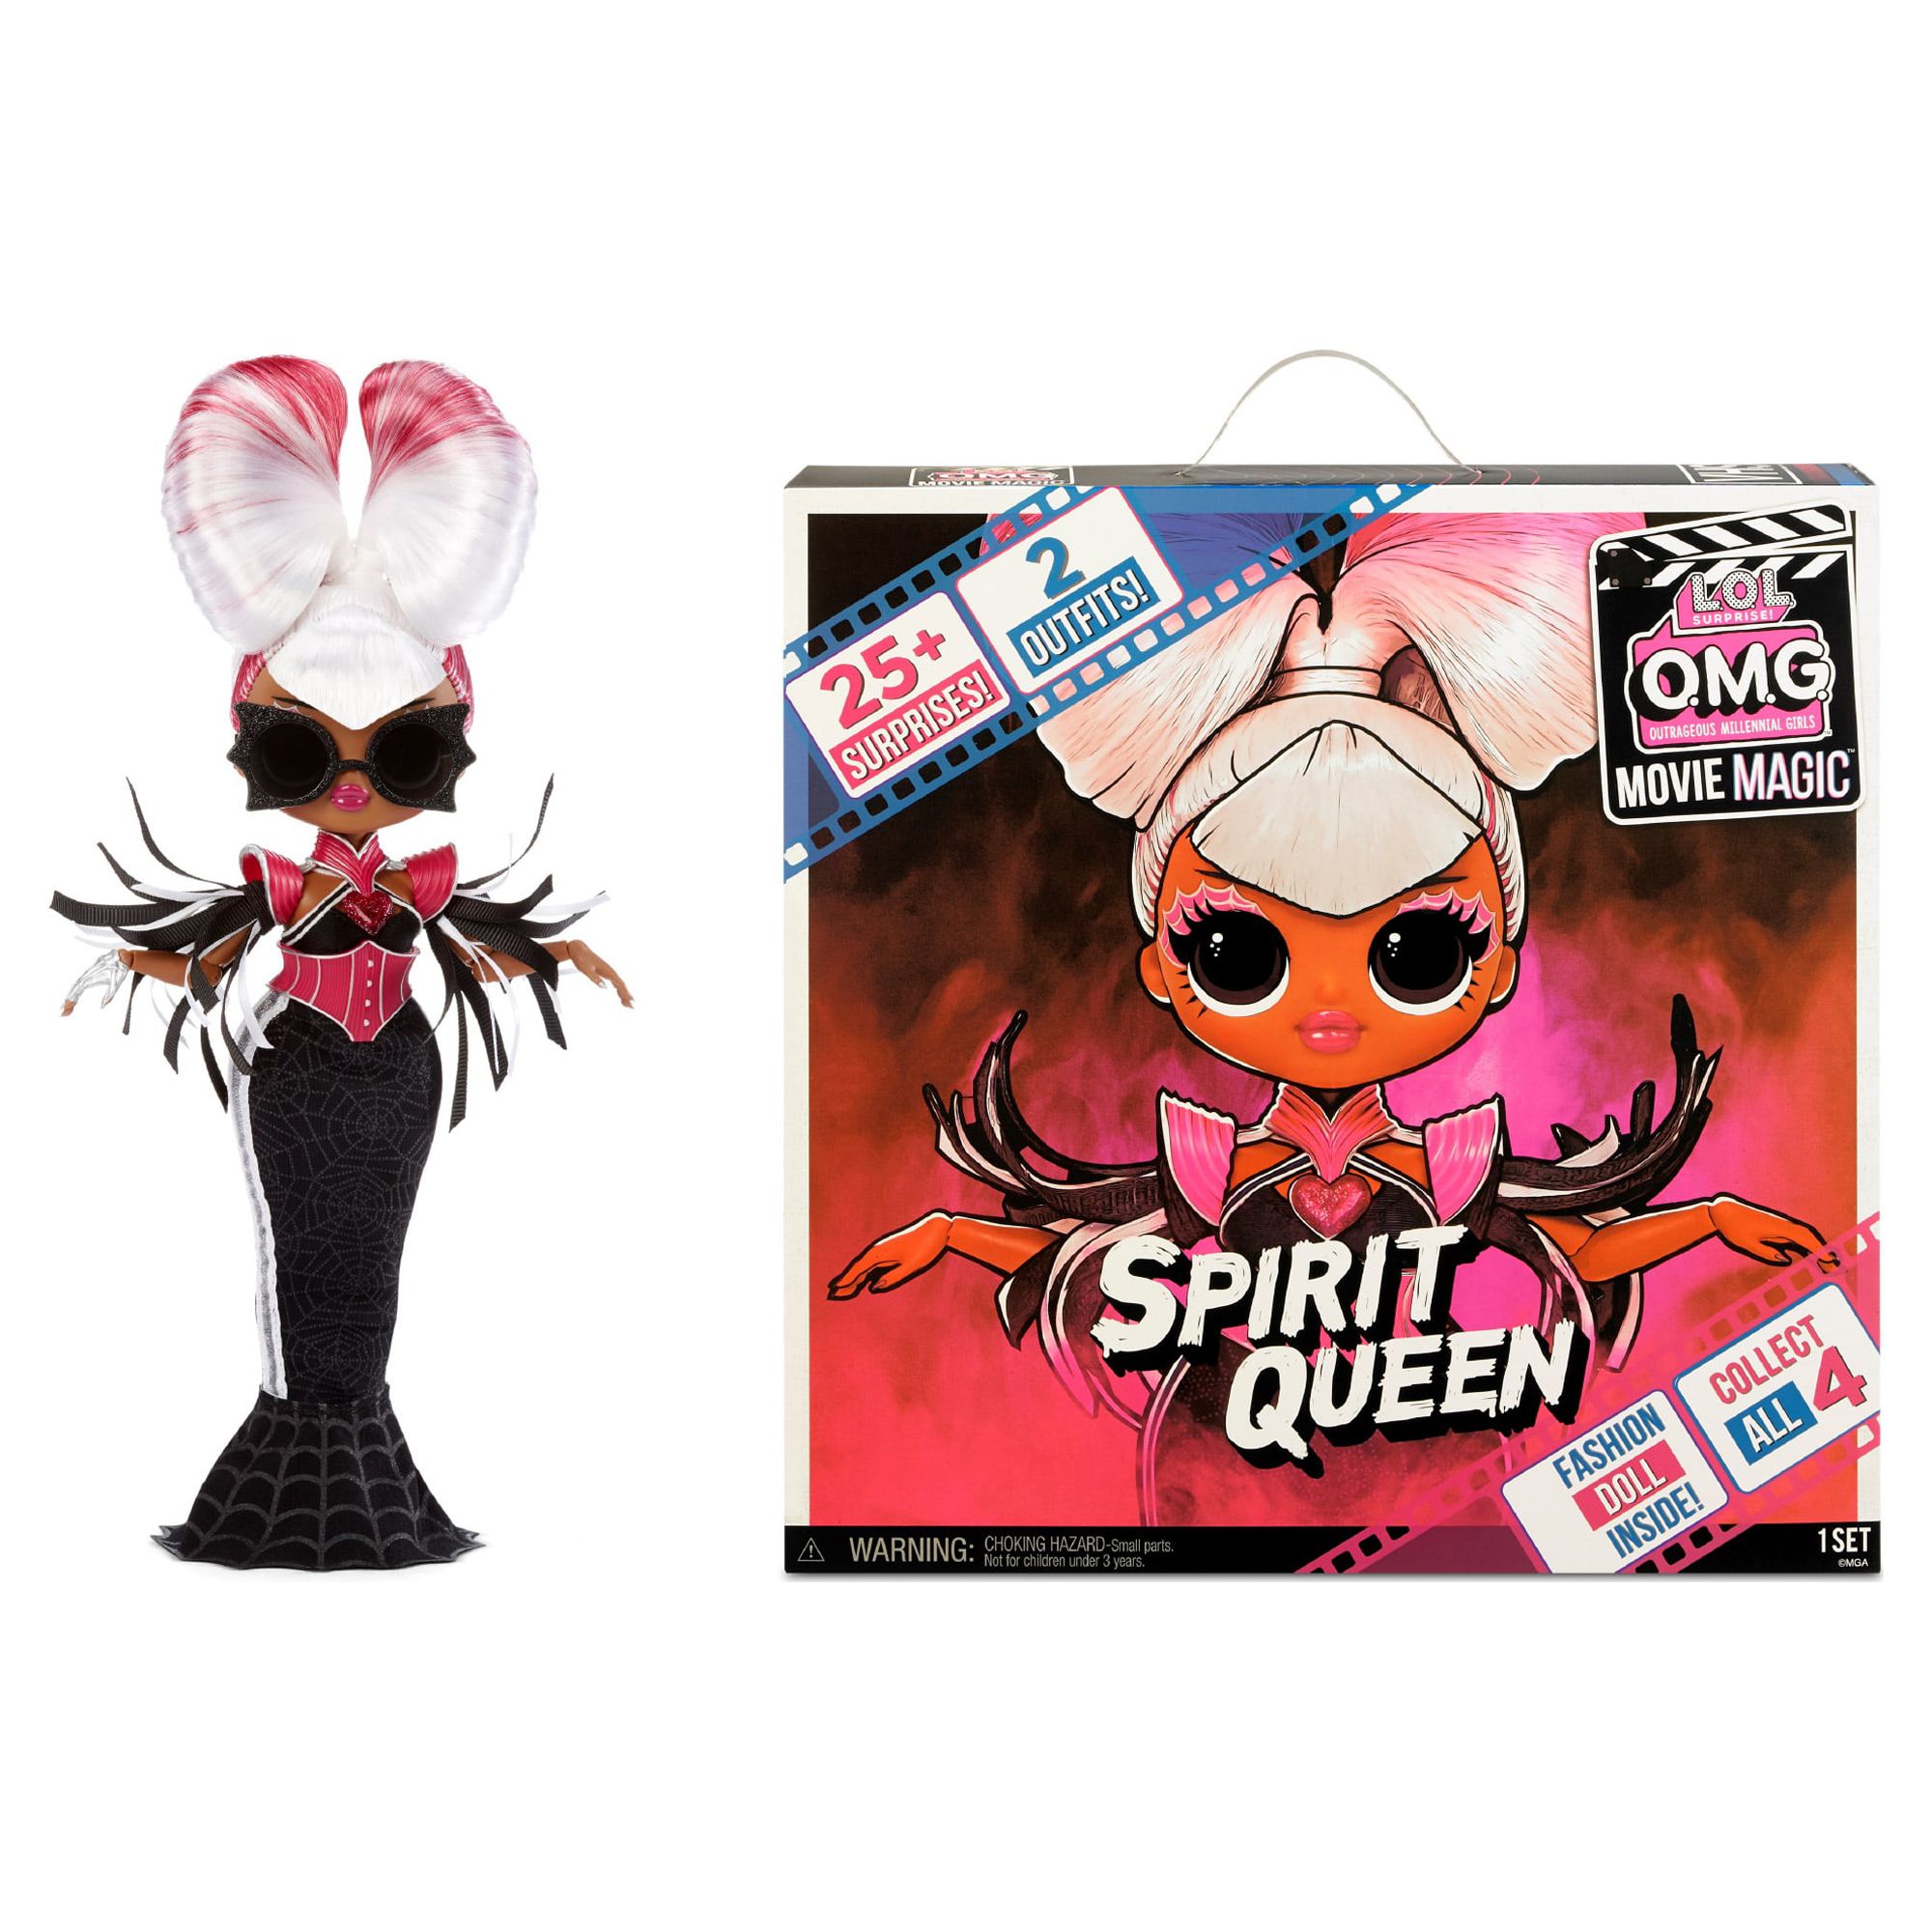 LOL Surprise Omg Movie Magic Spirit Queen Fashion Doll with 25 Surprises Including 2 Fashion Outfits, 3D Glasses, Movie Accessories And Reusable Playset – Great Gift for Girls Ages 4+ - image 3 of 7